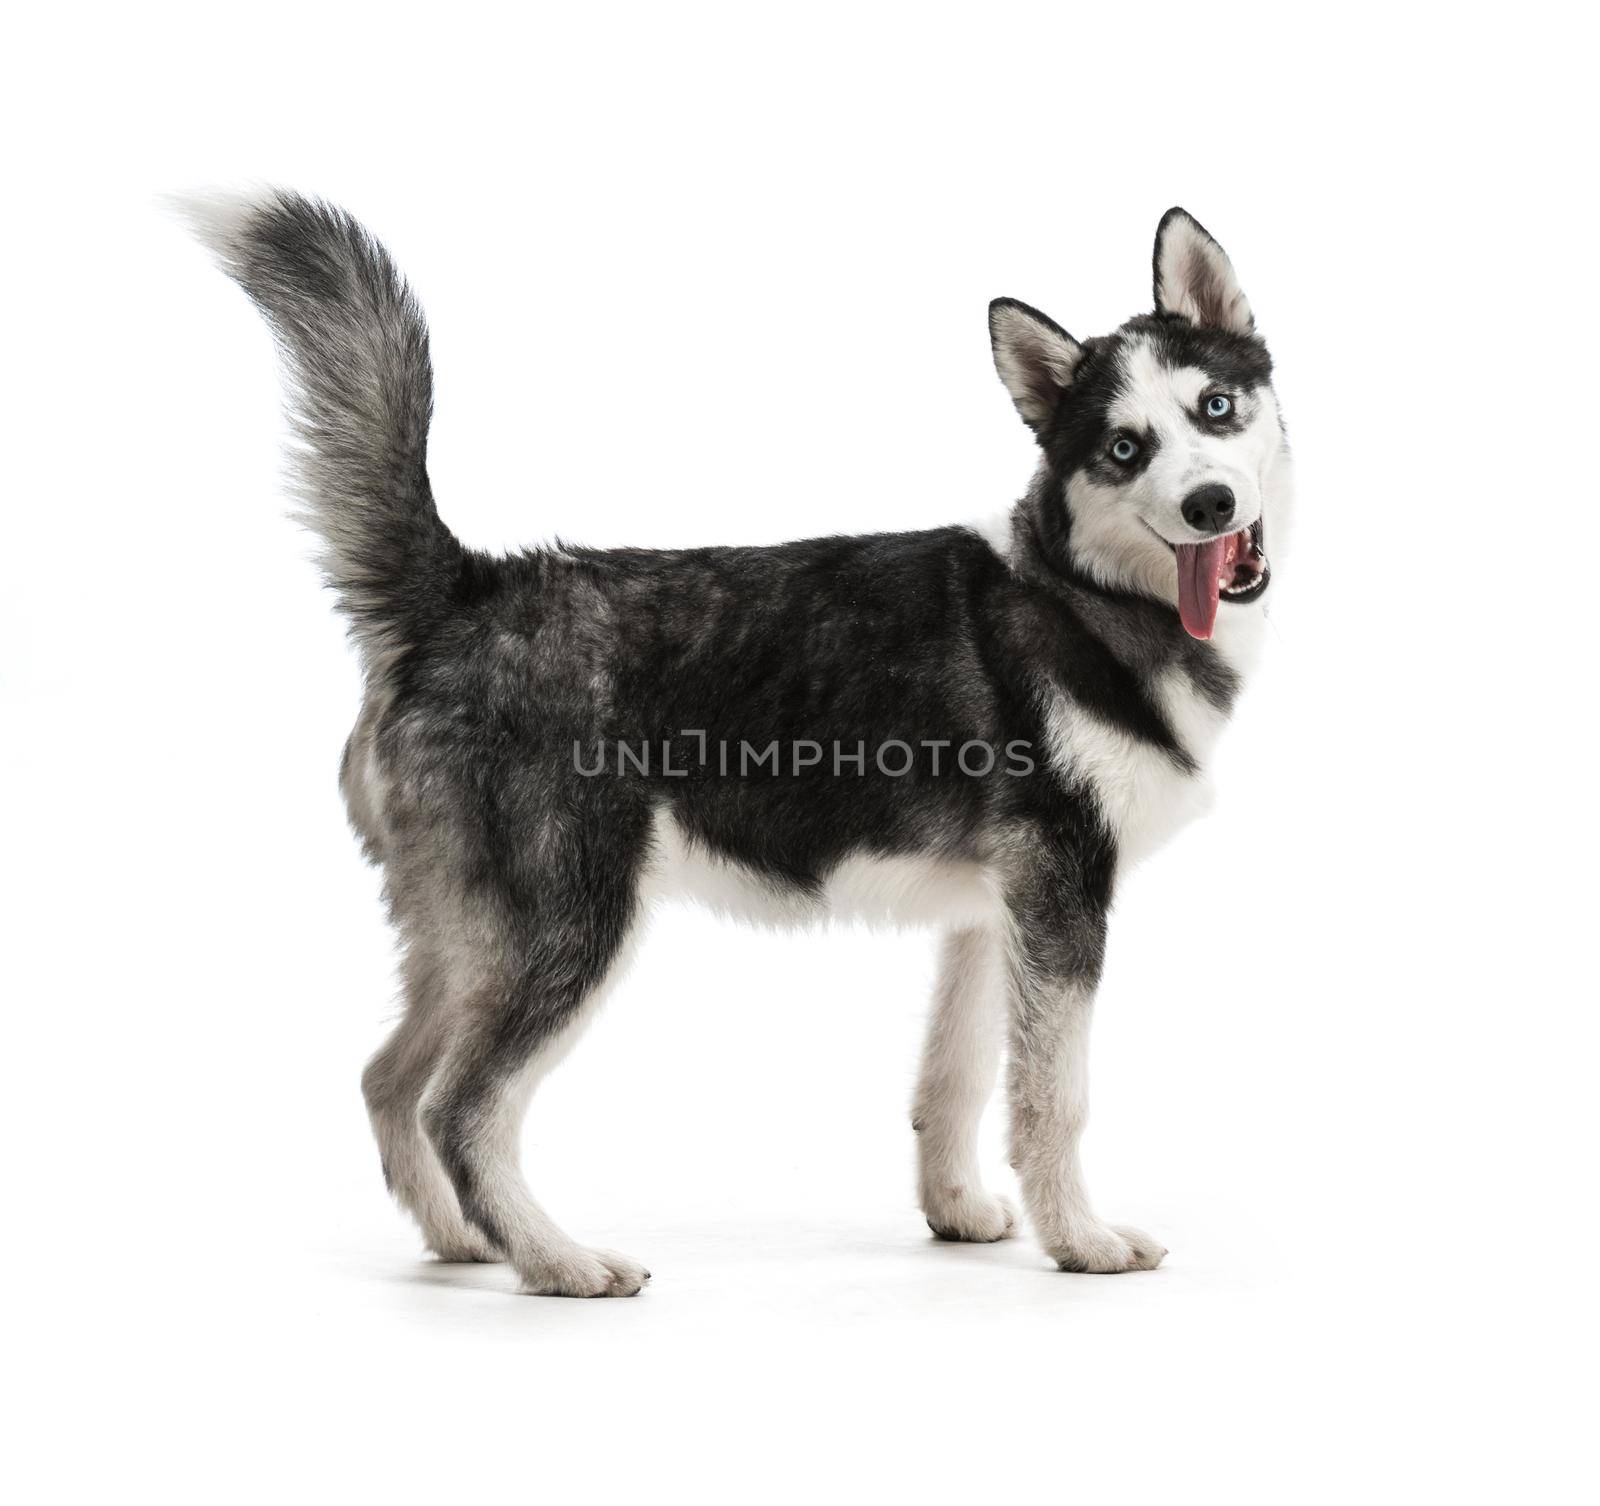 Adorable black and white with blue eyes Husky puppy. Studio shot. Isolated on white background.